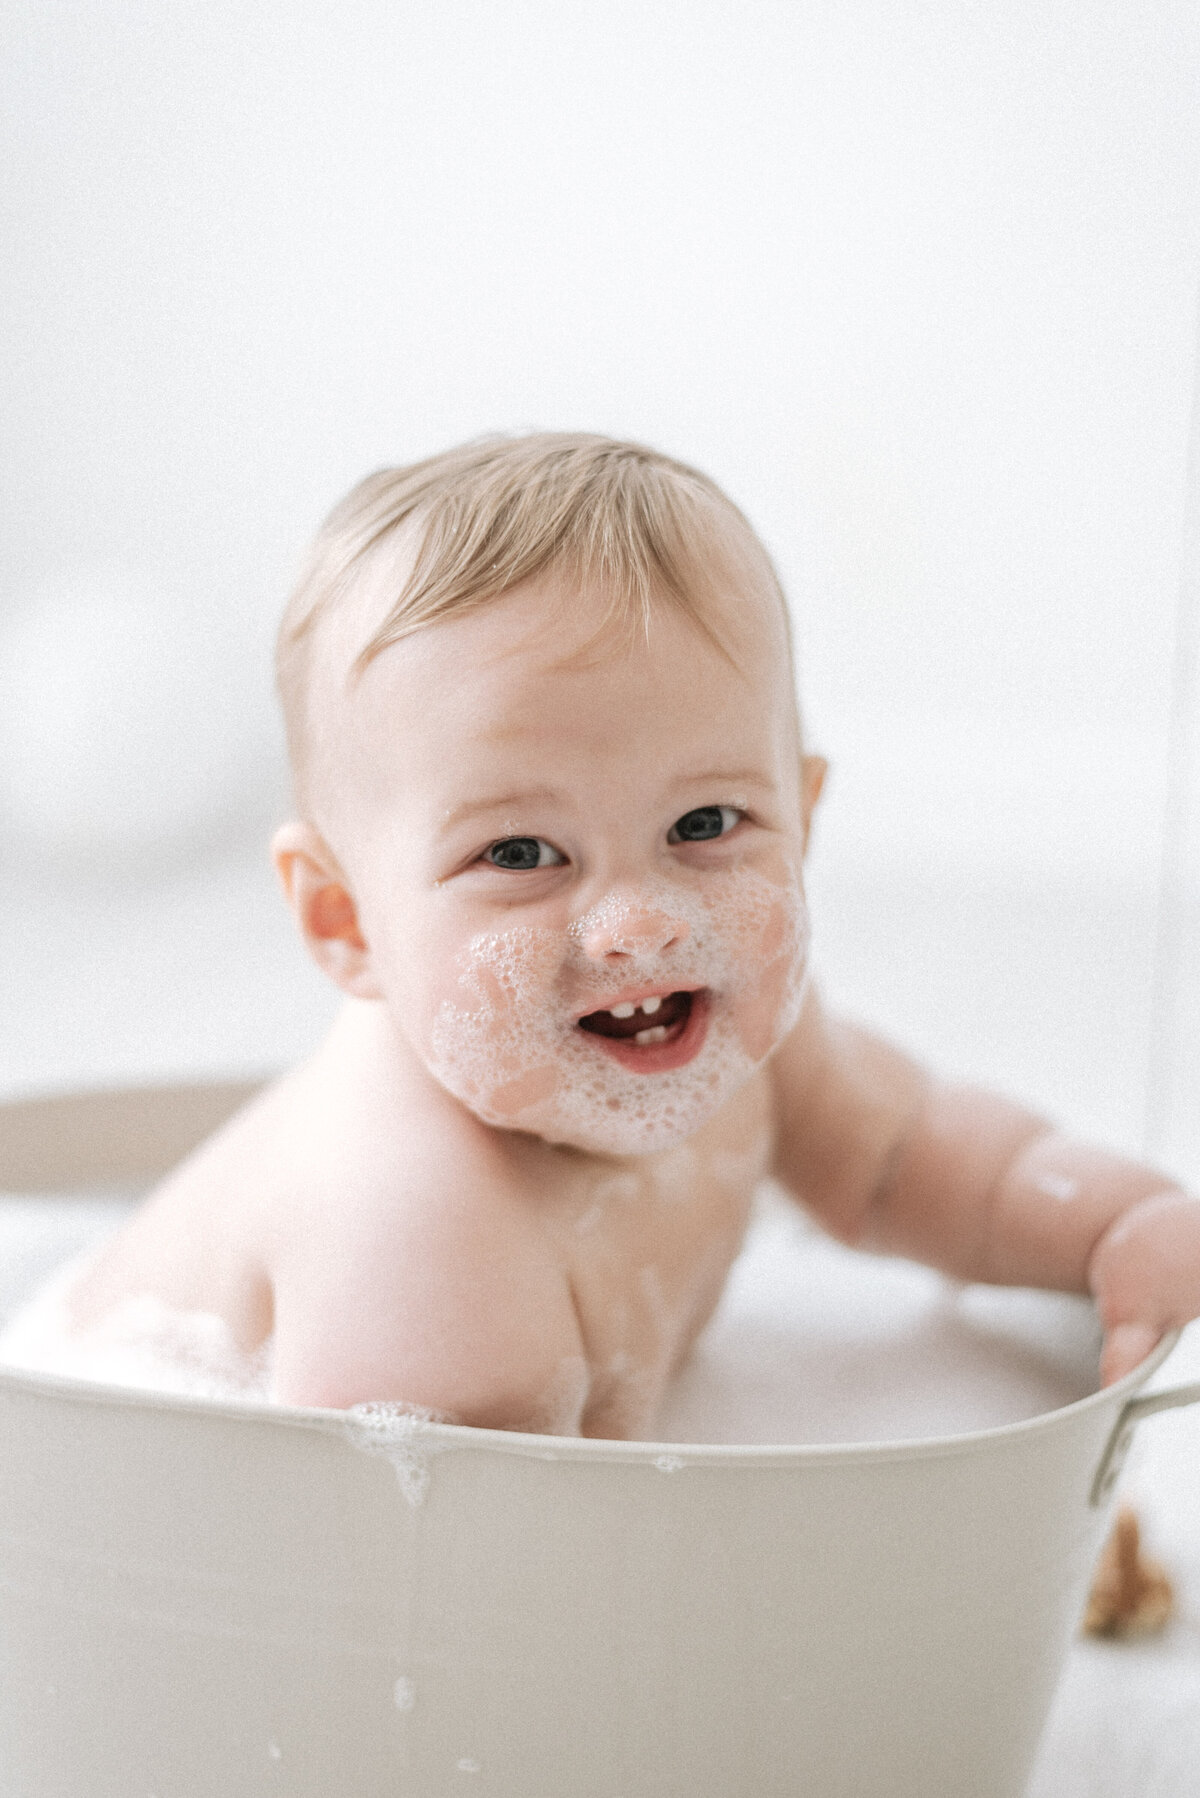 Baby smiling in a bath tub smiling with bubbles on his face in cake smash photoshoot